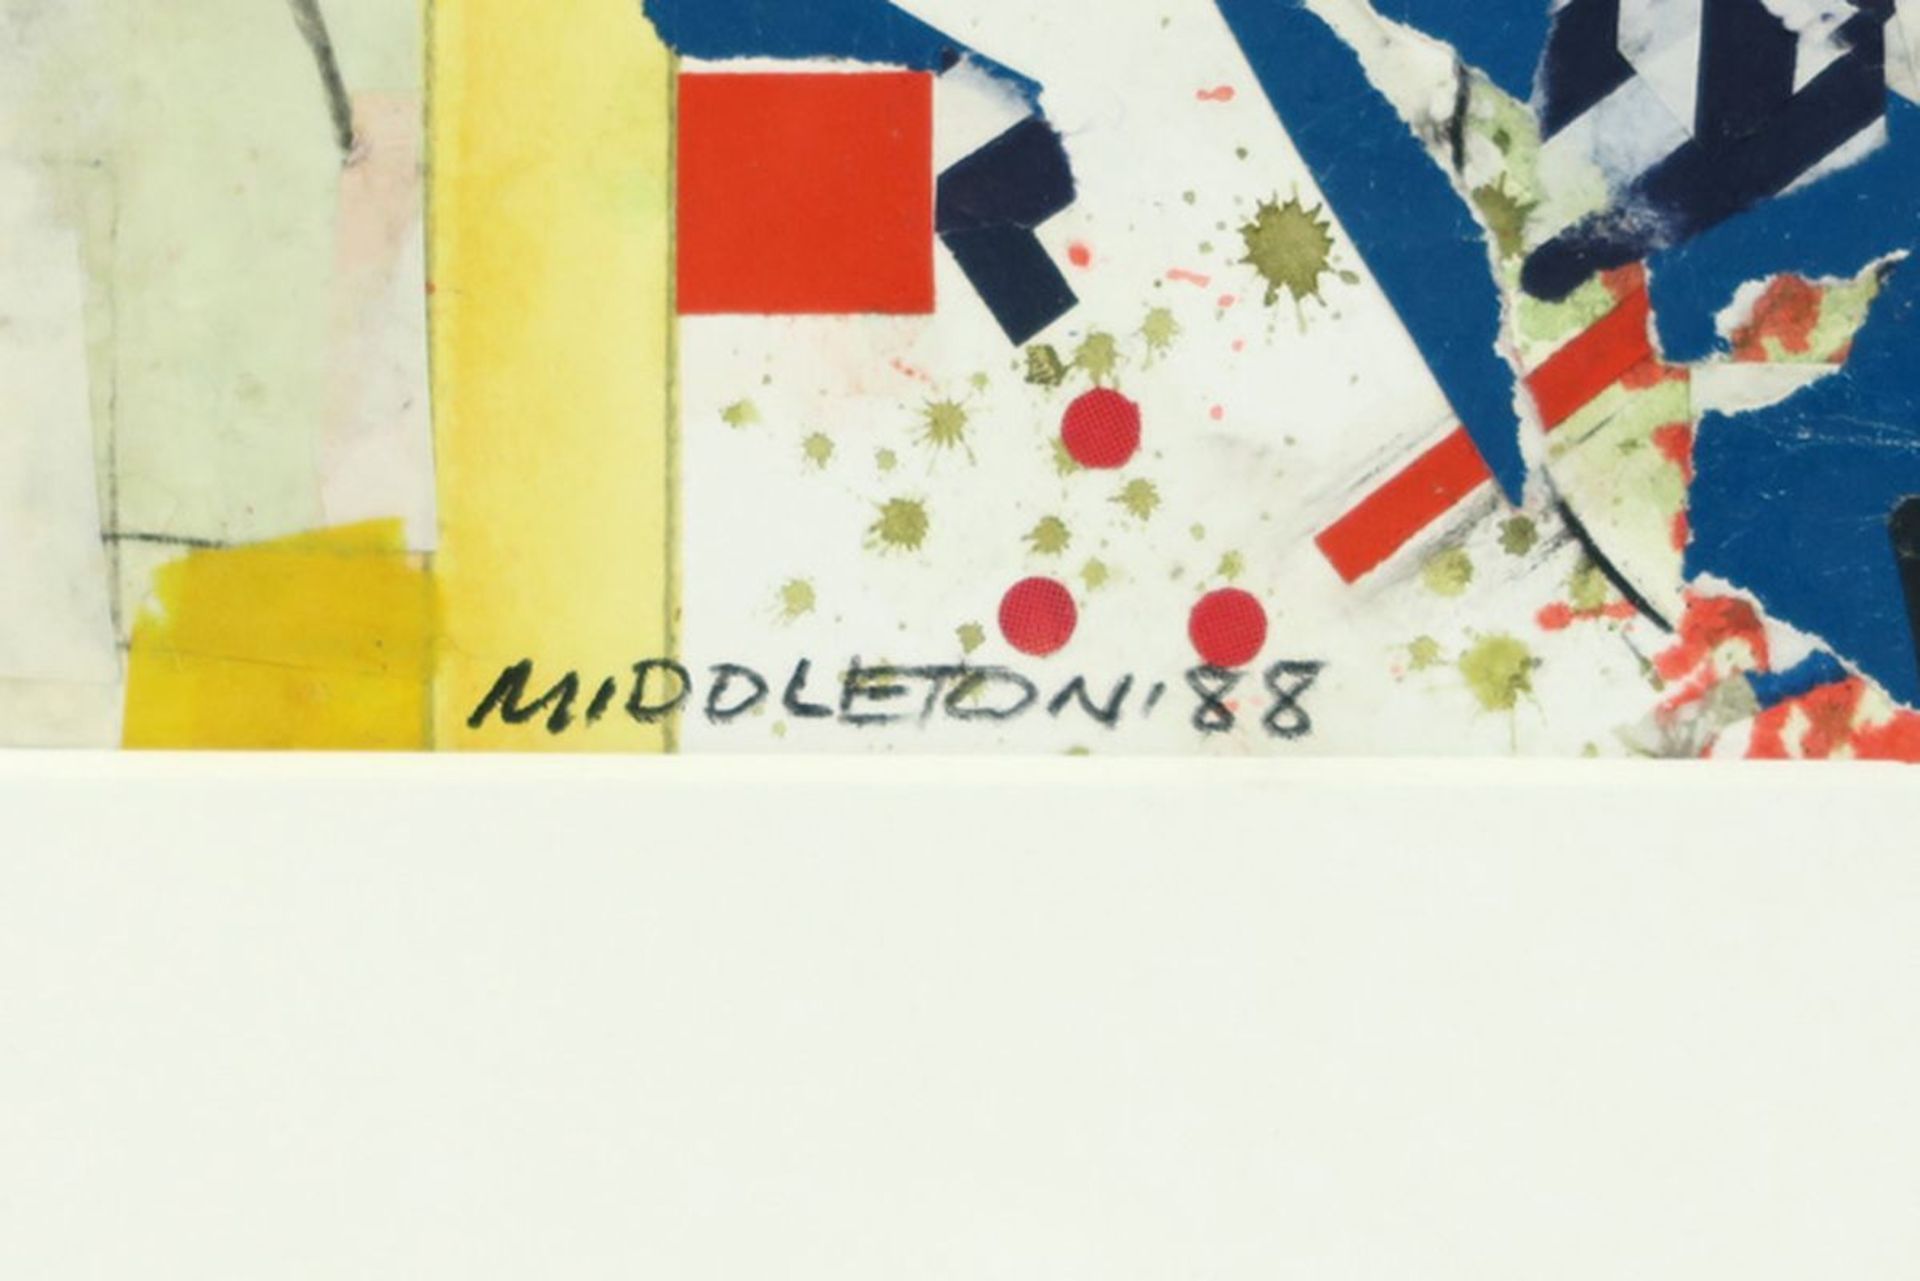 20th Cent. American mixed media (with collage) - signed Sam Middleton and dated 1988 [...] - Image 3 of 3